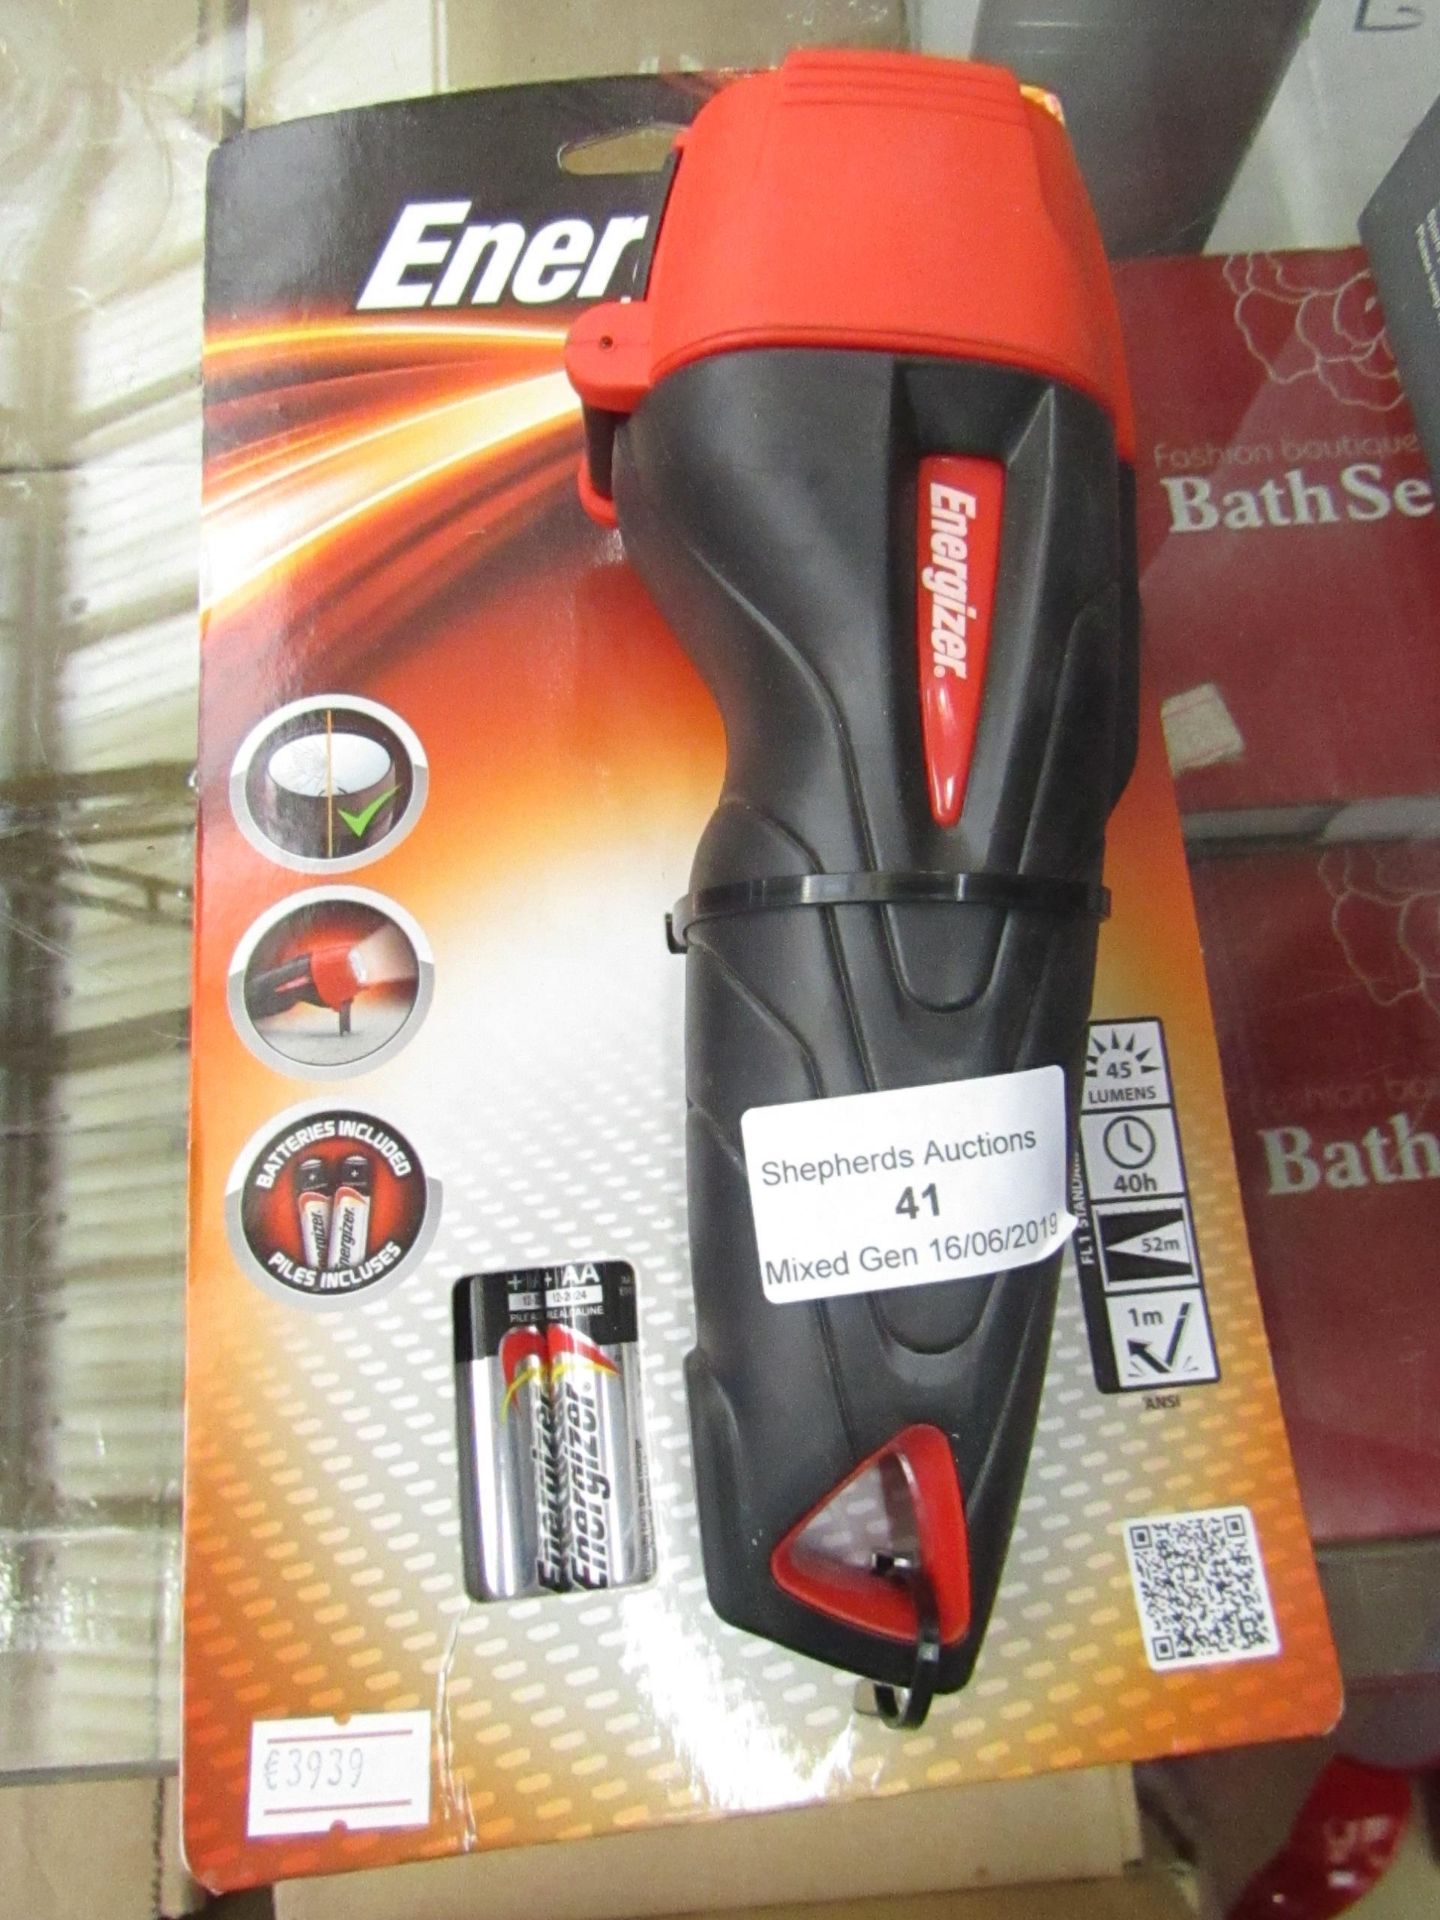 Energizer Impact Rubber professional LED torch, new in packaging